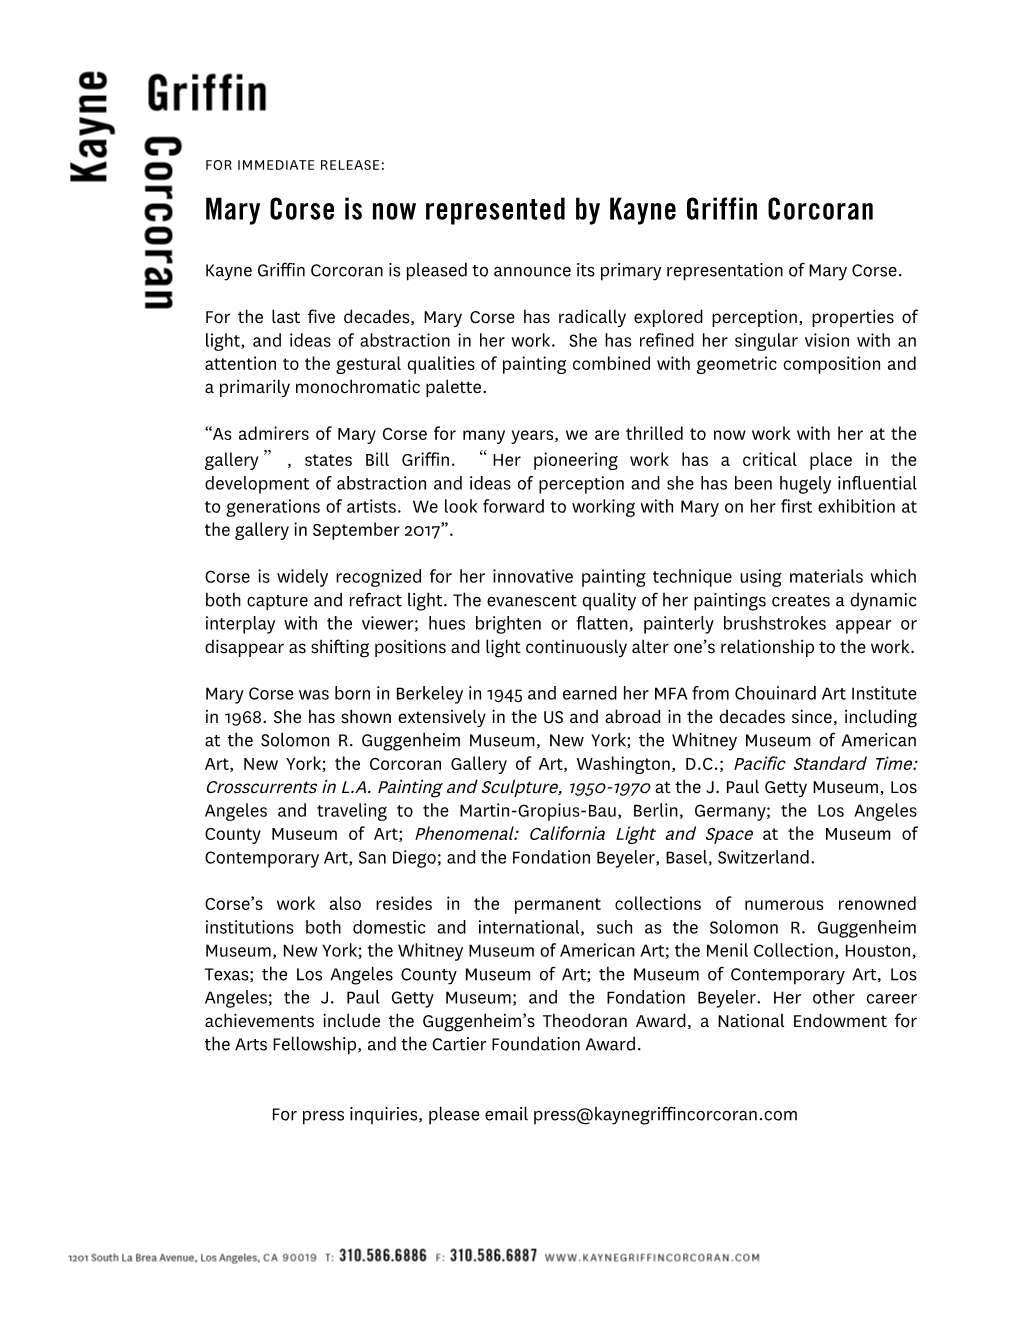 Mary Corse Is Now Represented by Kayne Griffin Corcoran